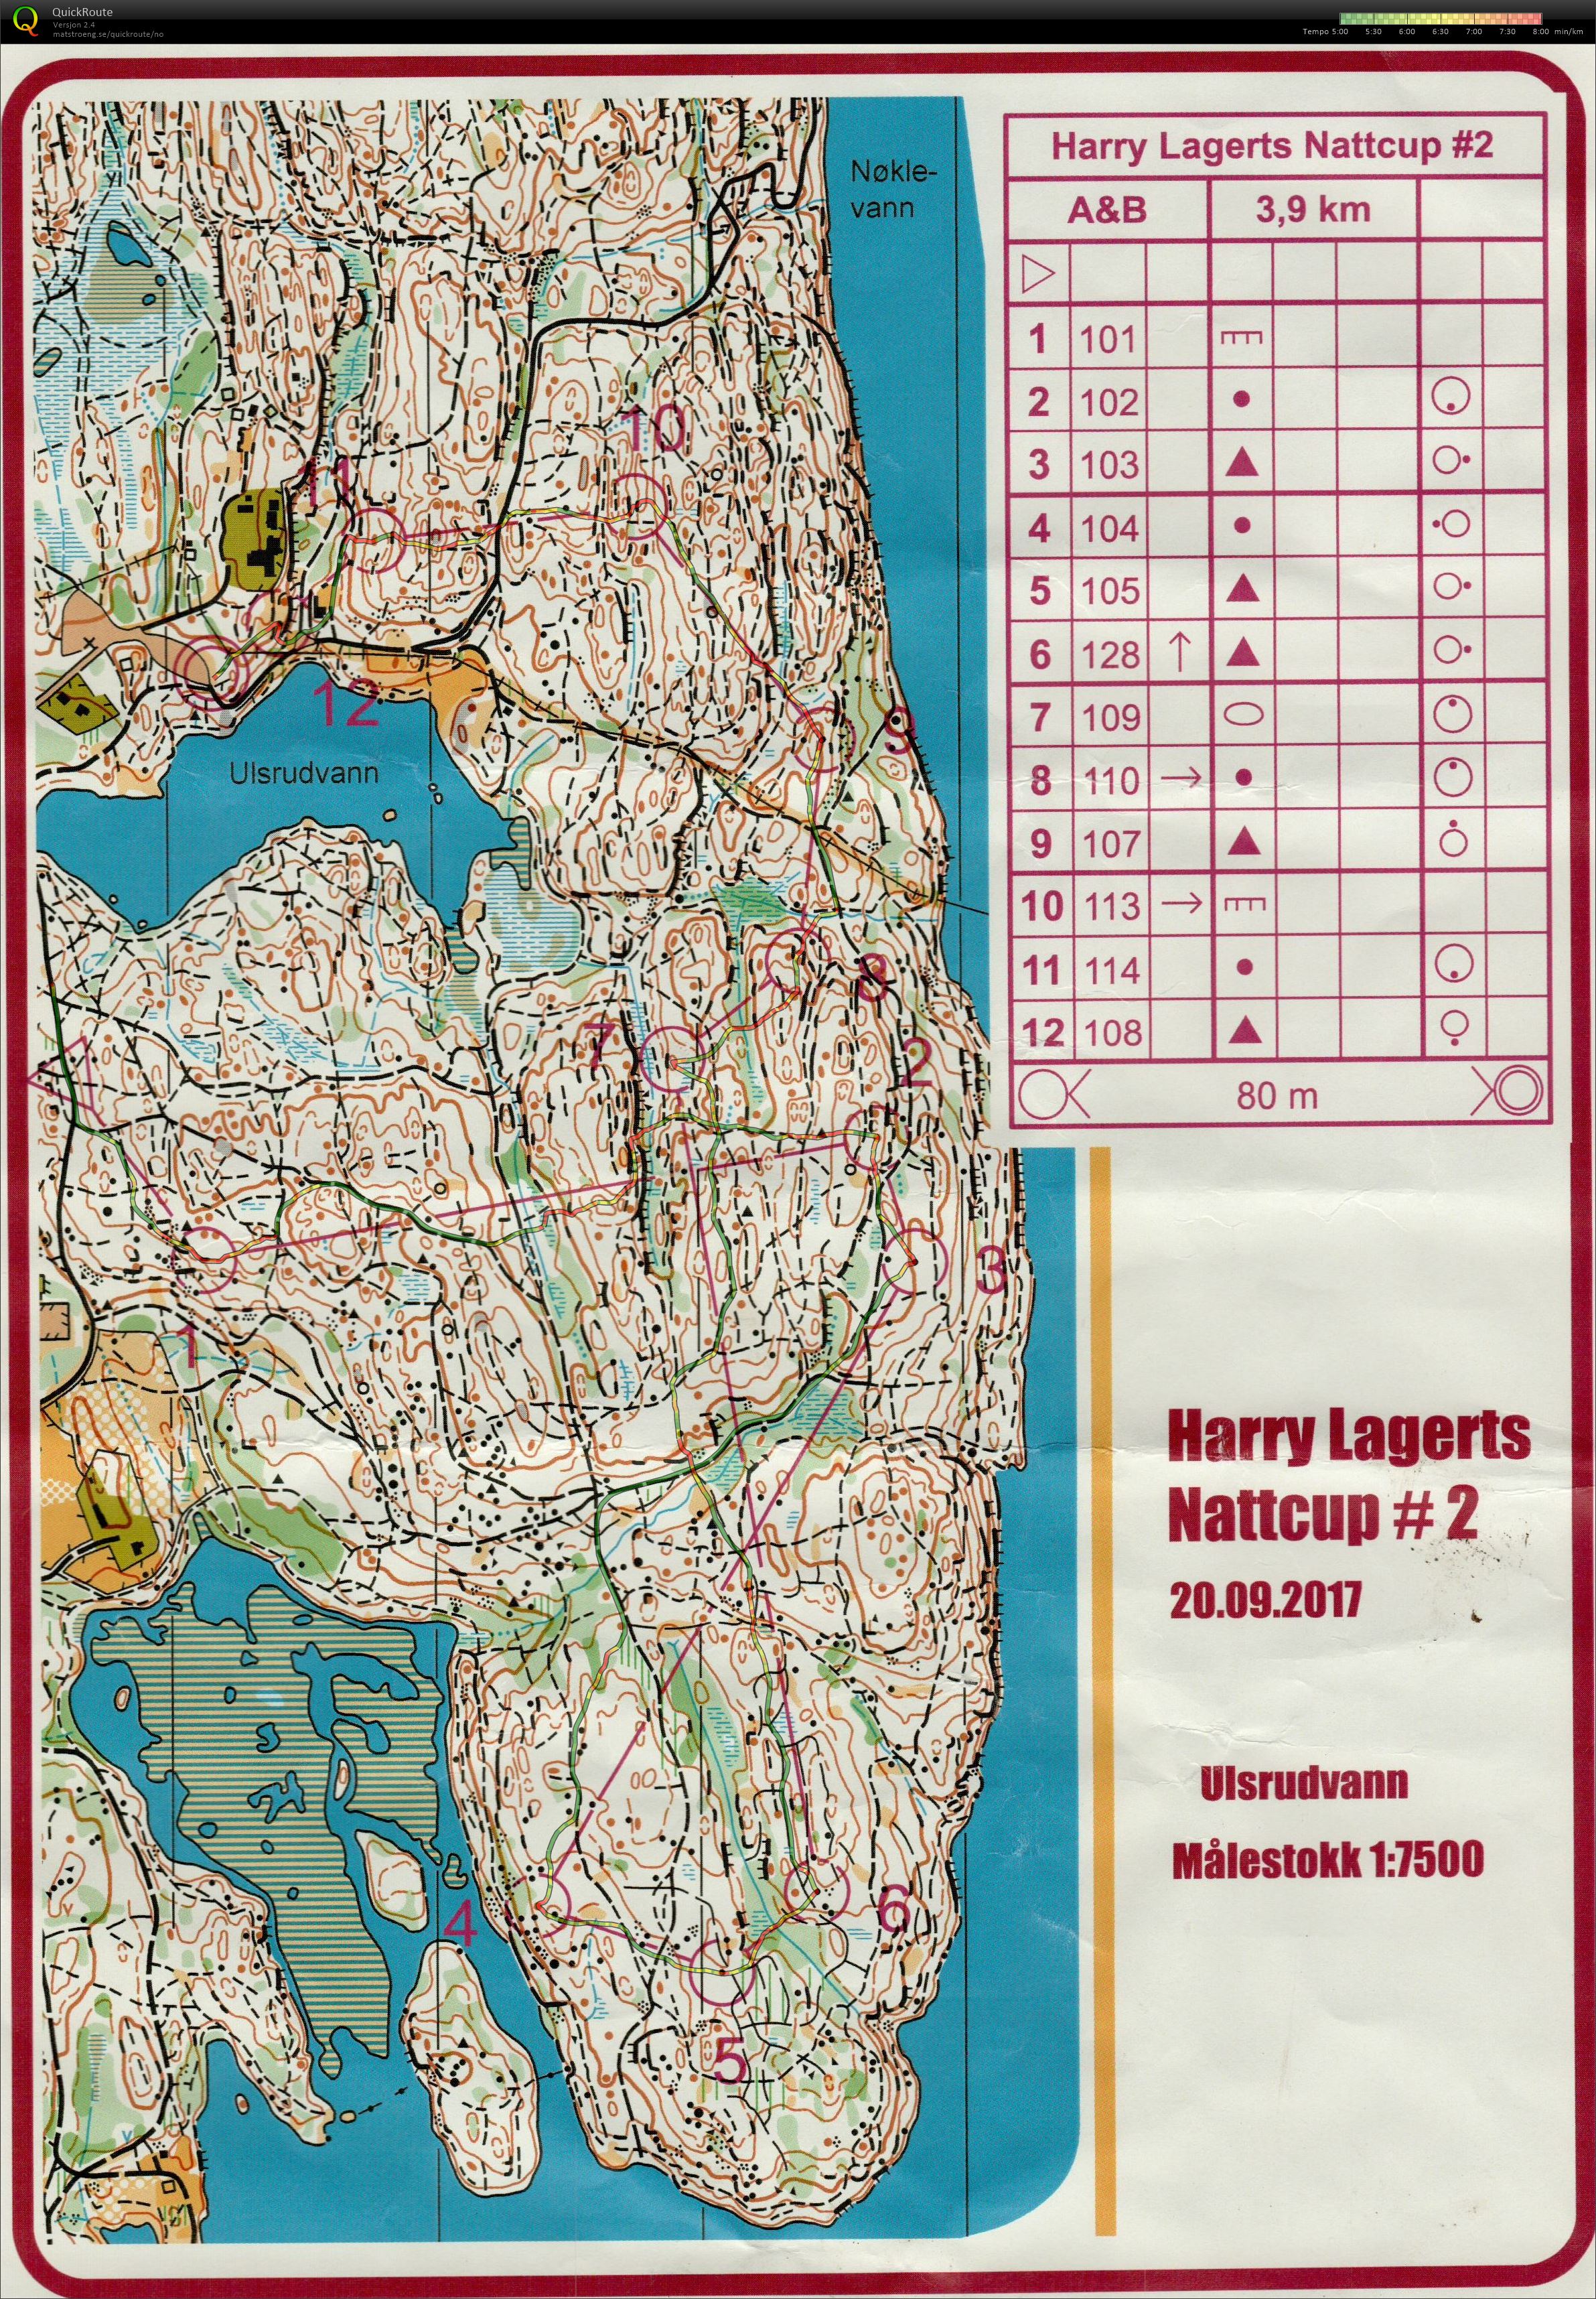 Harry Lagerts Nattcup #2 (20-09-2017)